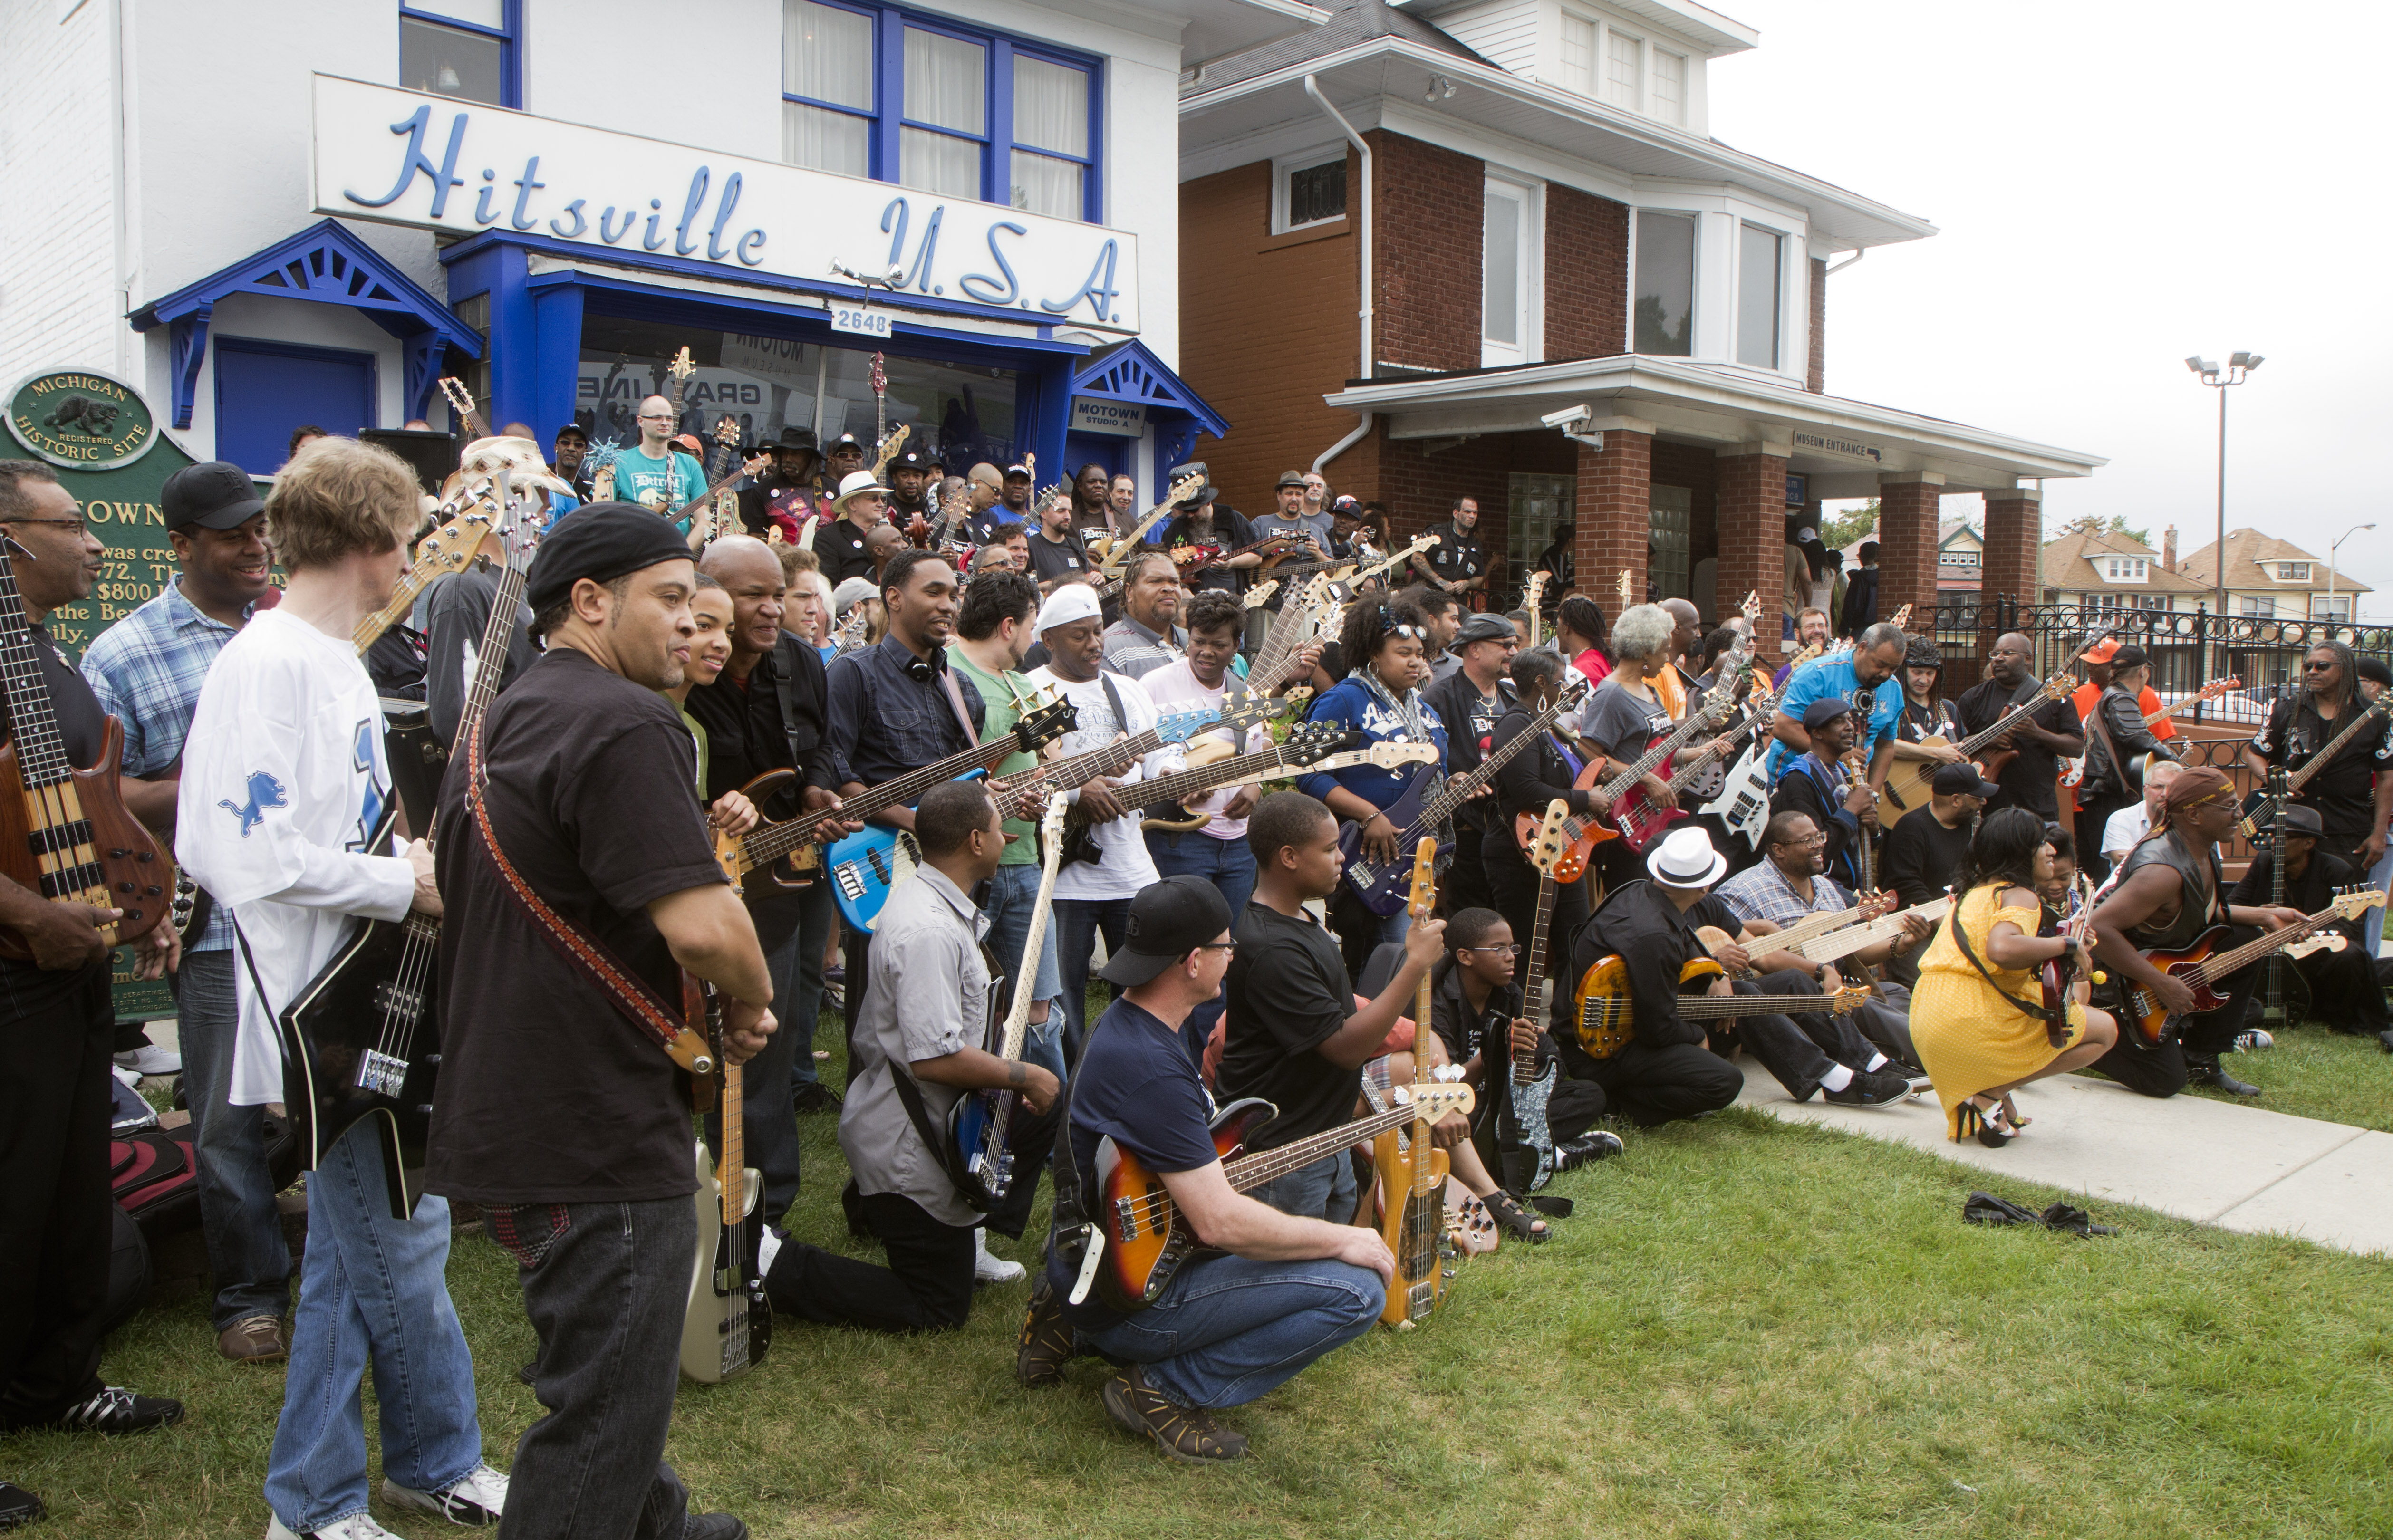 Bassists gather in front of the historic Hitsville USA building